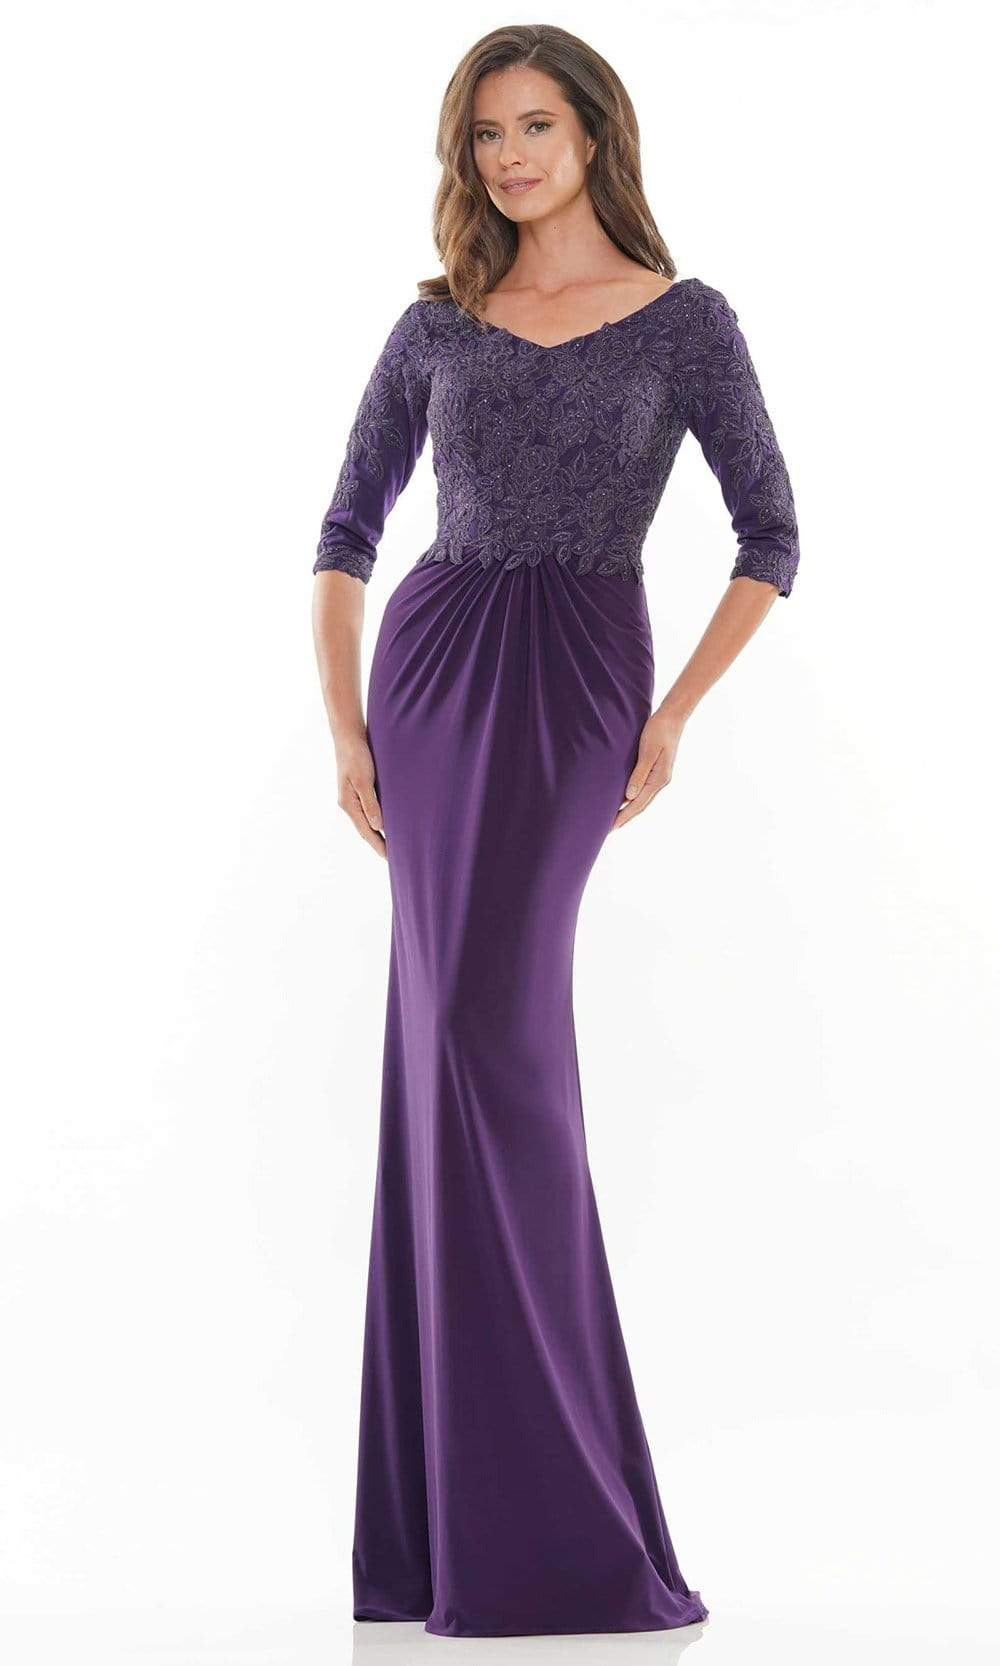 Rina Di Montella - RD2731 Quarter Sleeve Lace Bodice Gown Mother of the Bride Dresess 6 / Eggplant